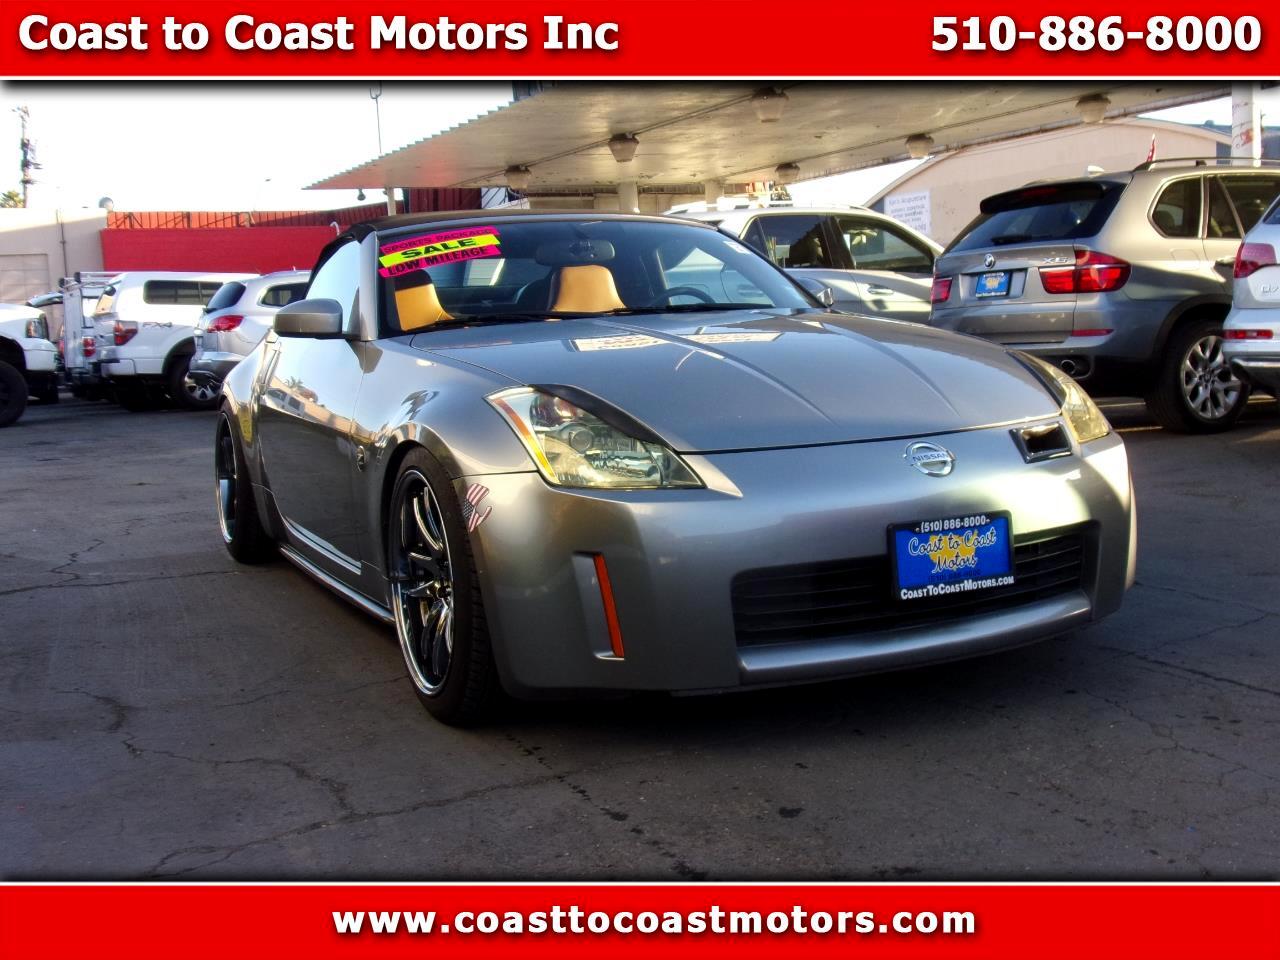 Used 2004 Nissan 350z 2dr Cpe Manual Touring For Sale In